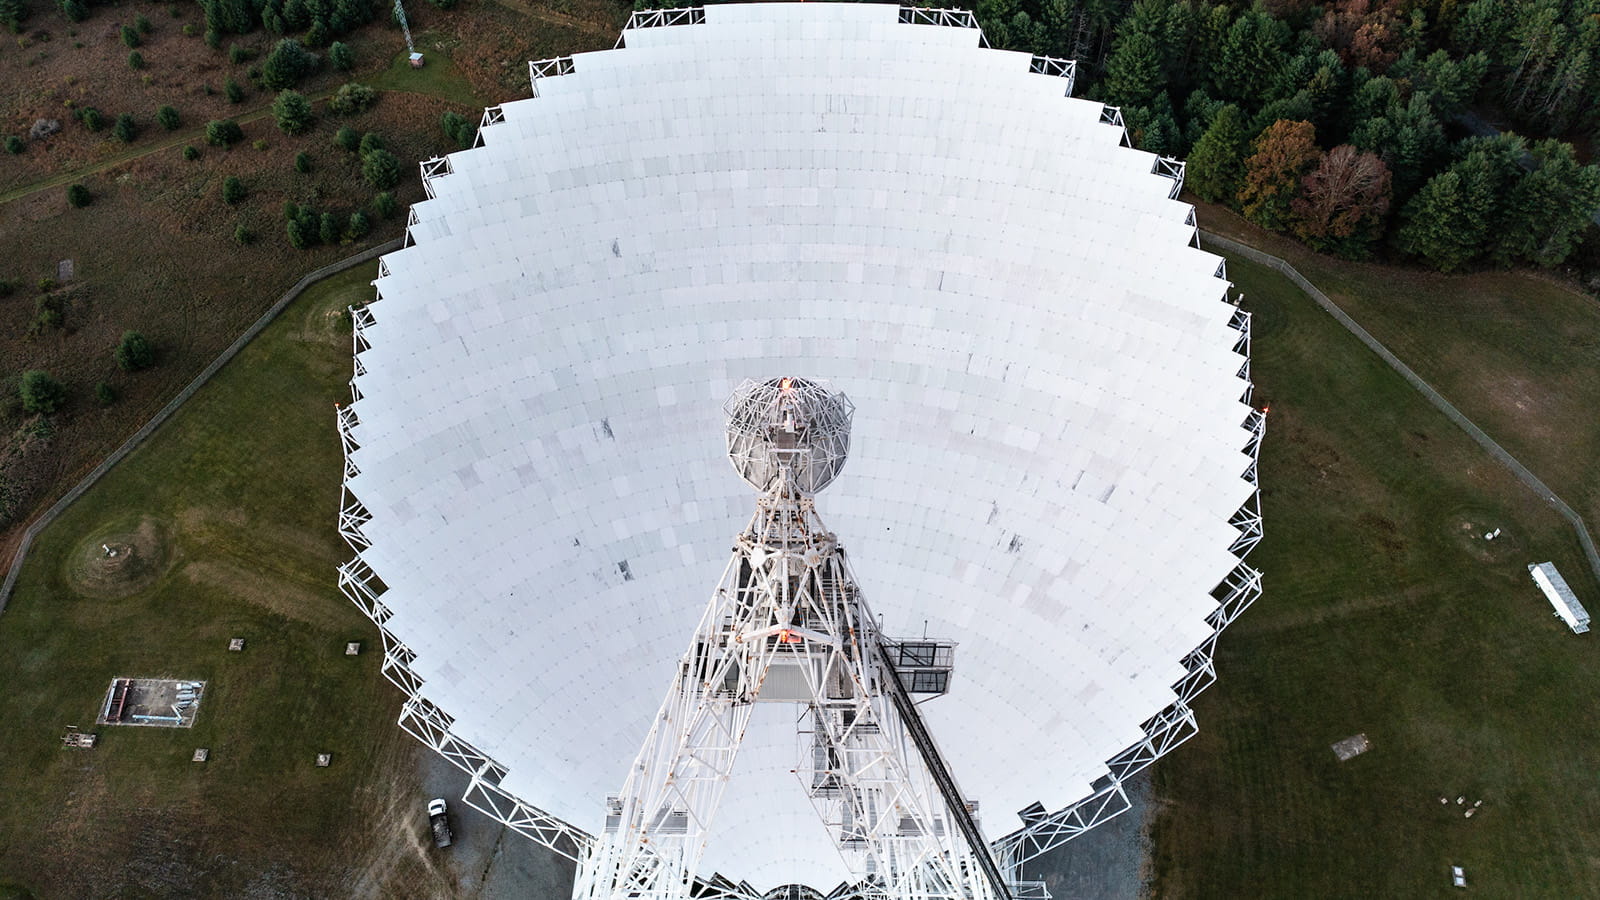 Green Bank Telescope dish from above